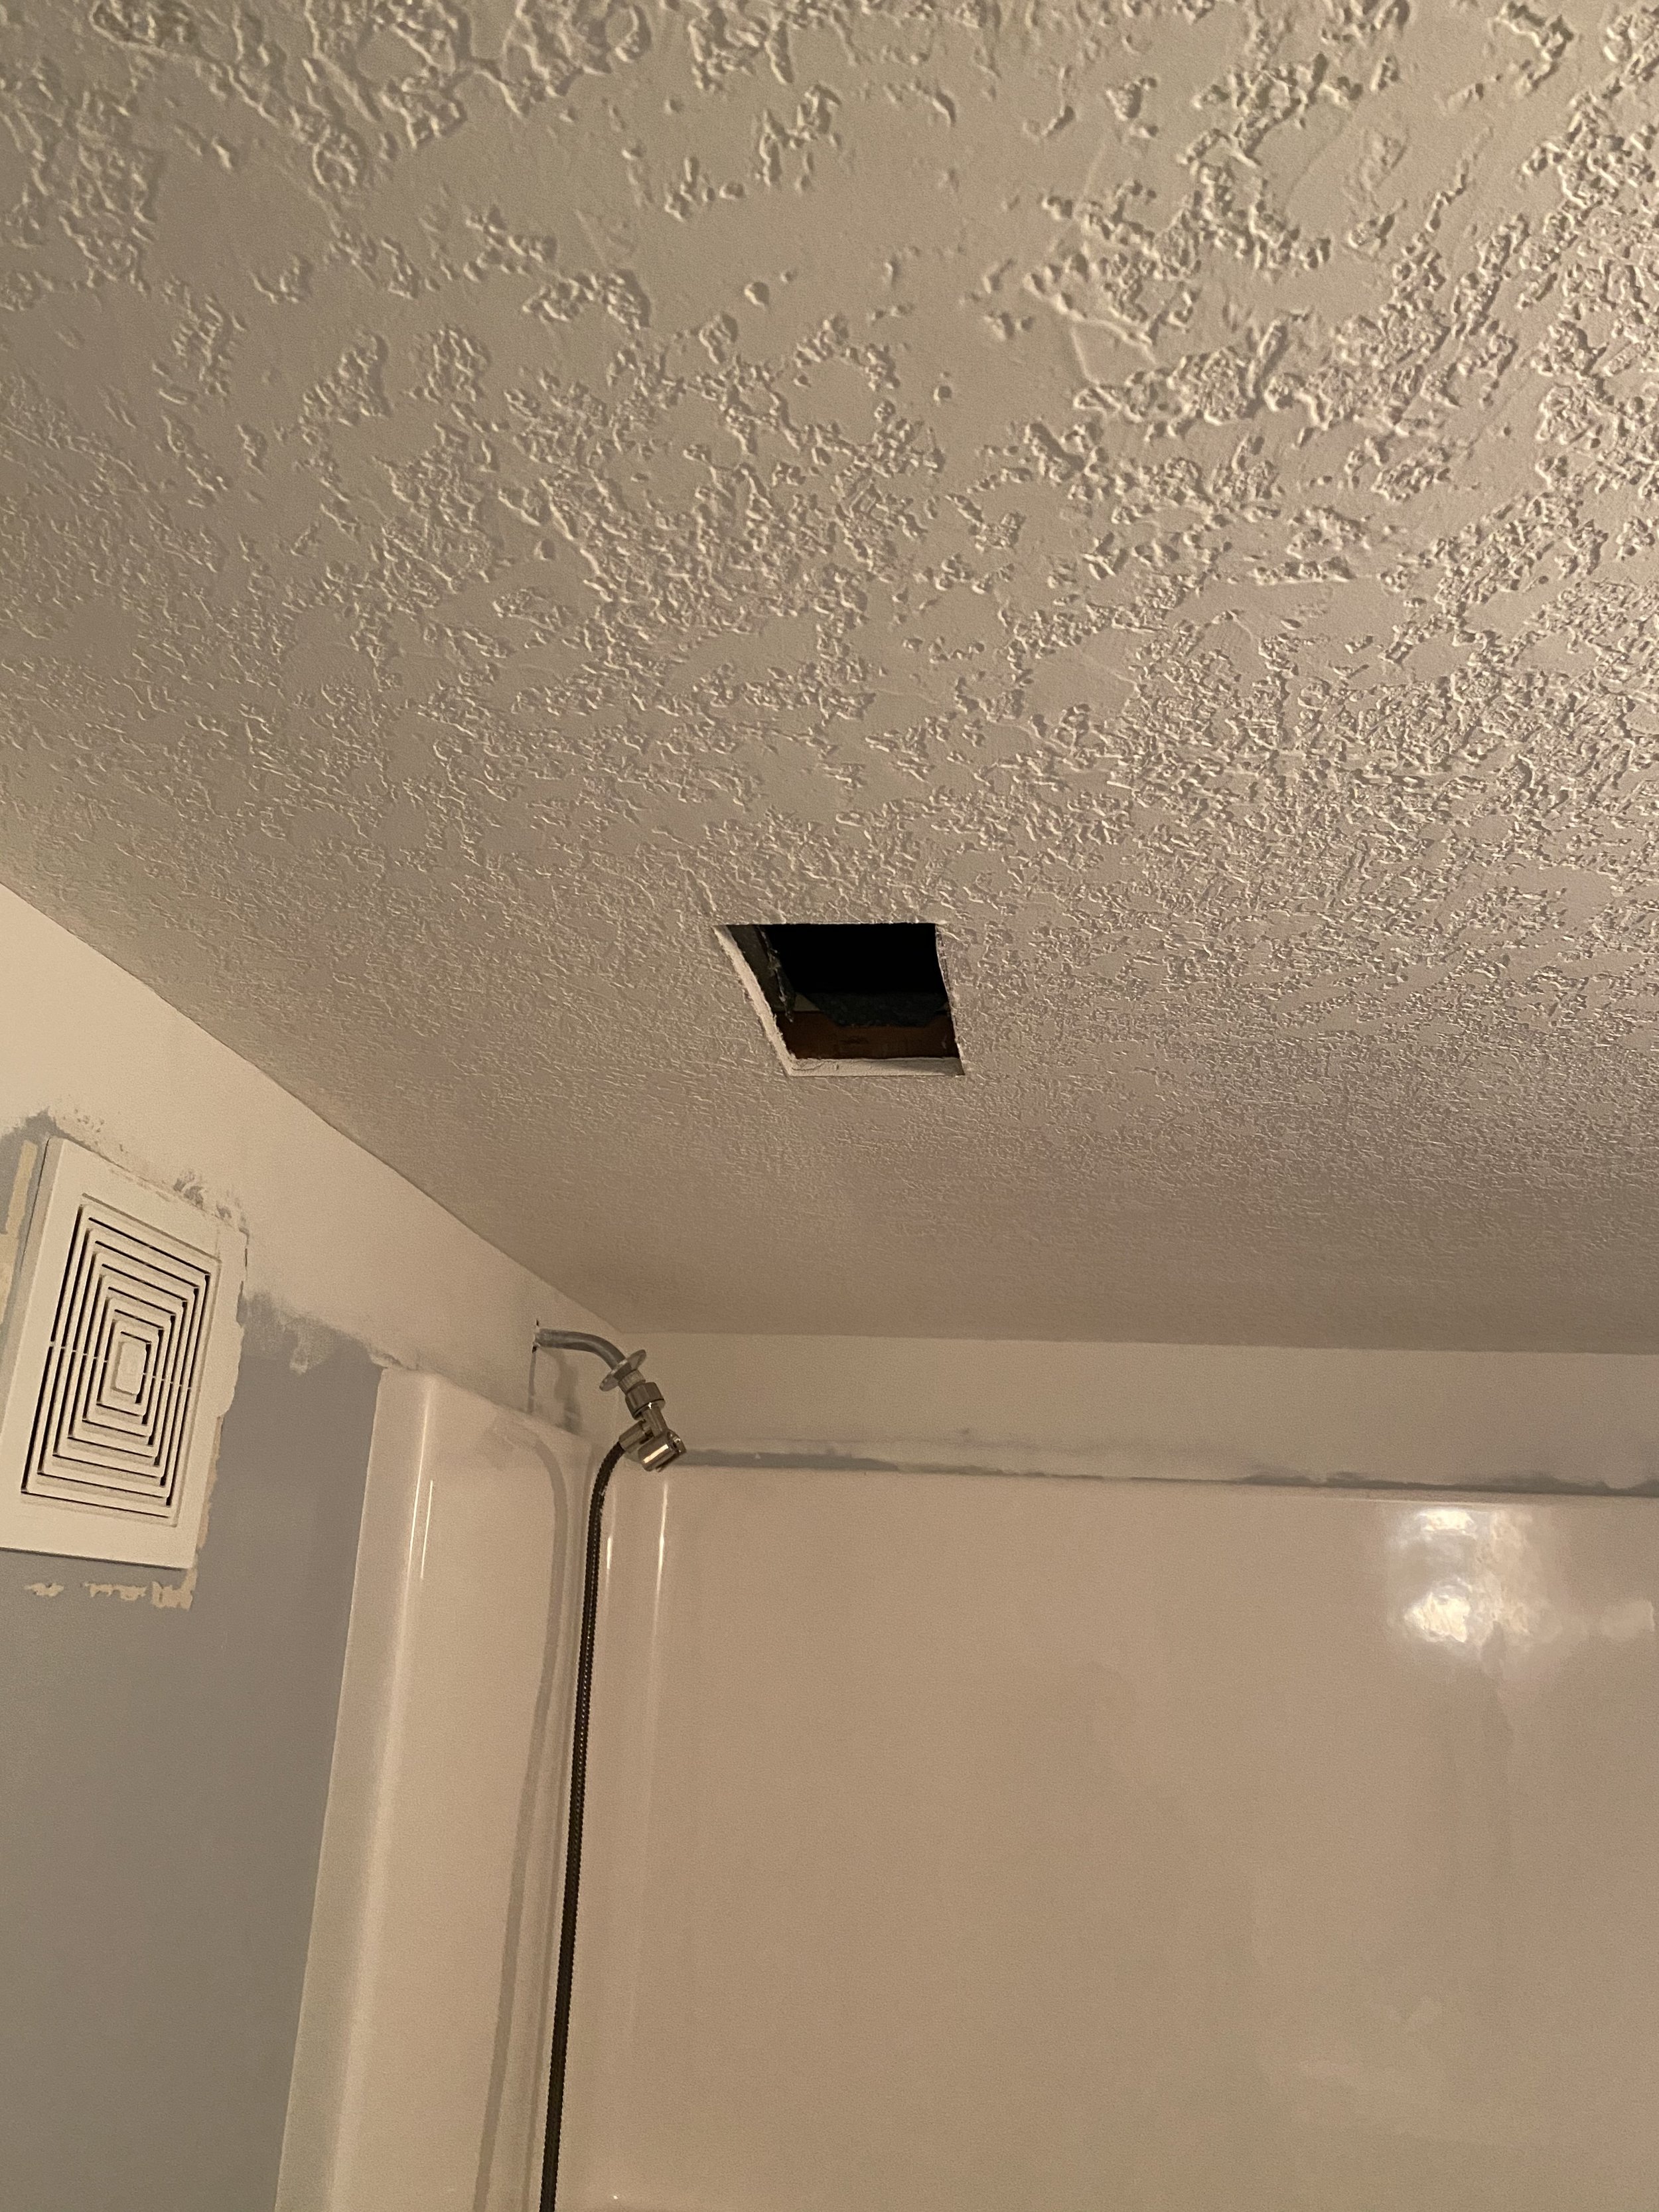 mold photo on ceiling during repair - Ankeny house.jpg